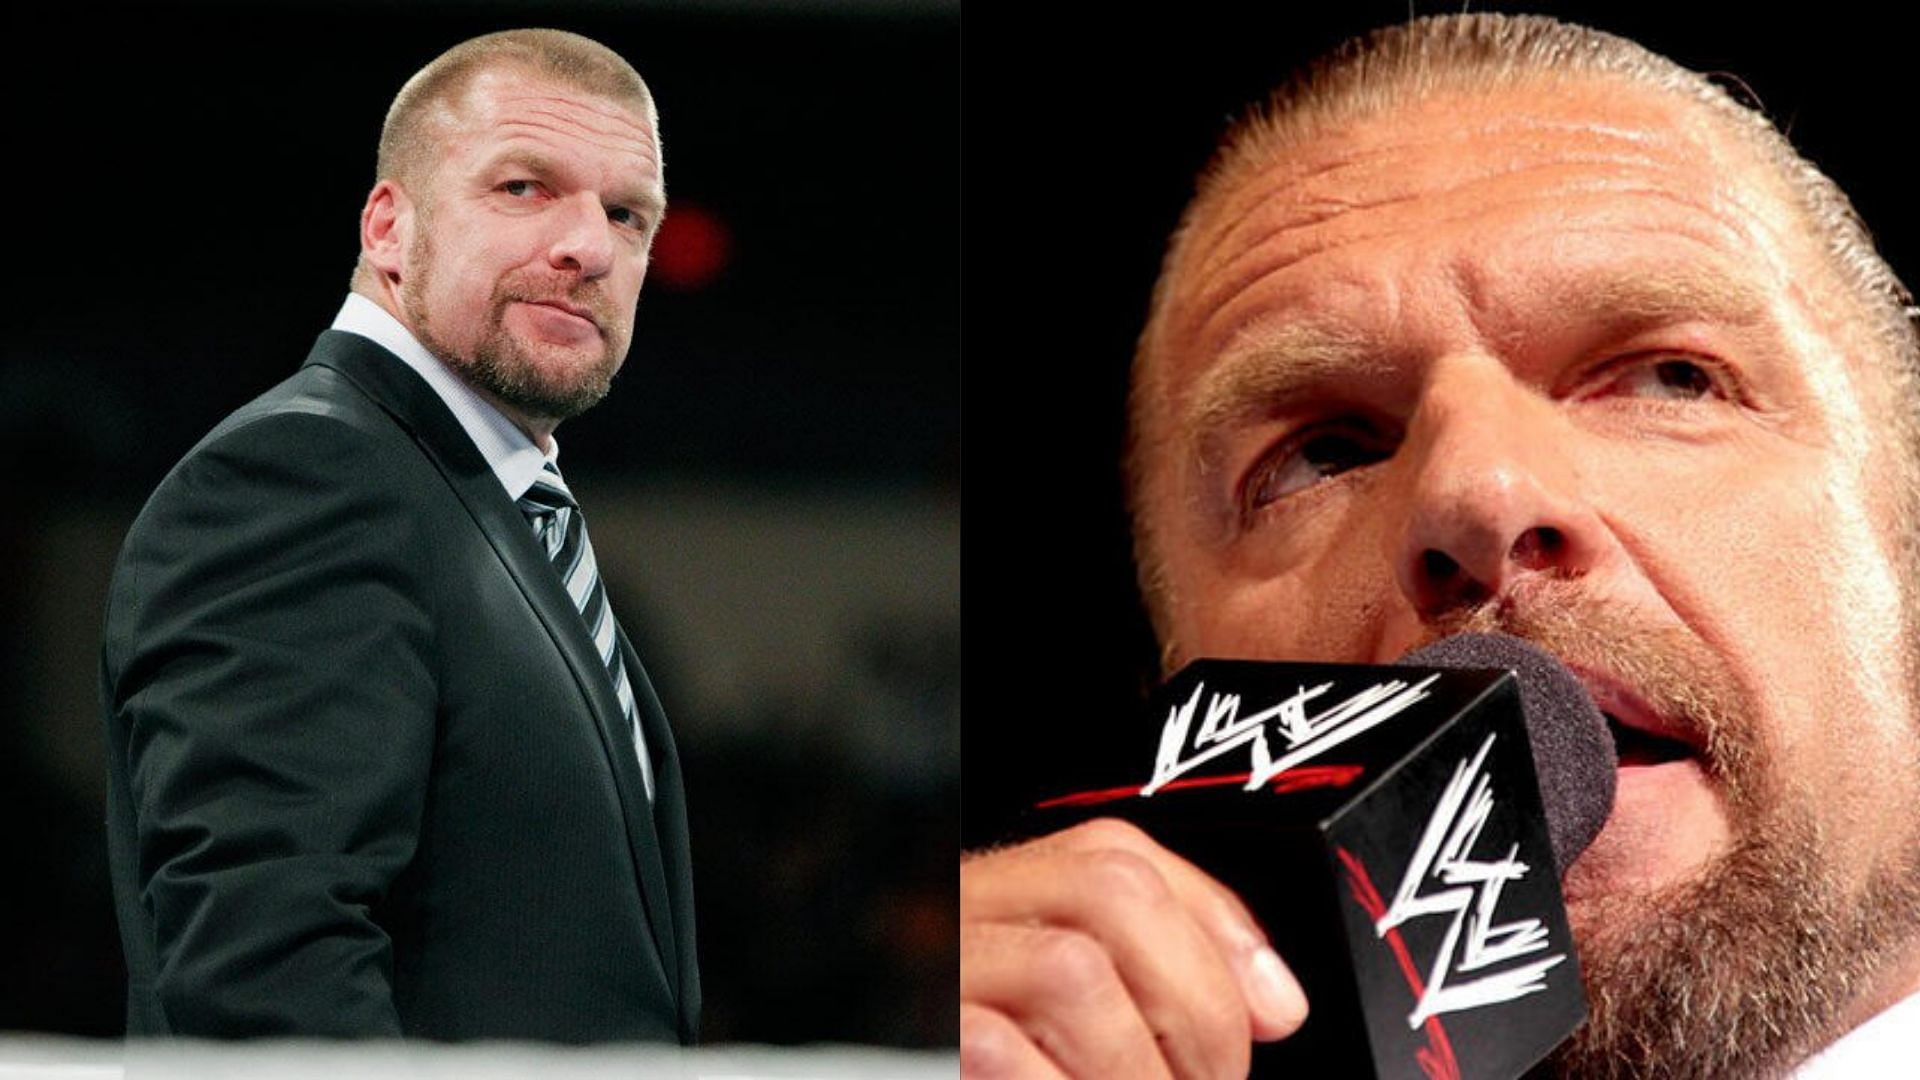 Triple H has found himself under fire for the decision